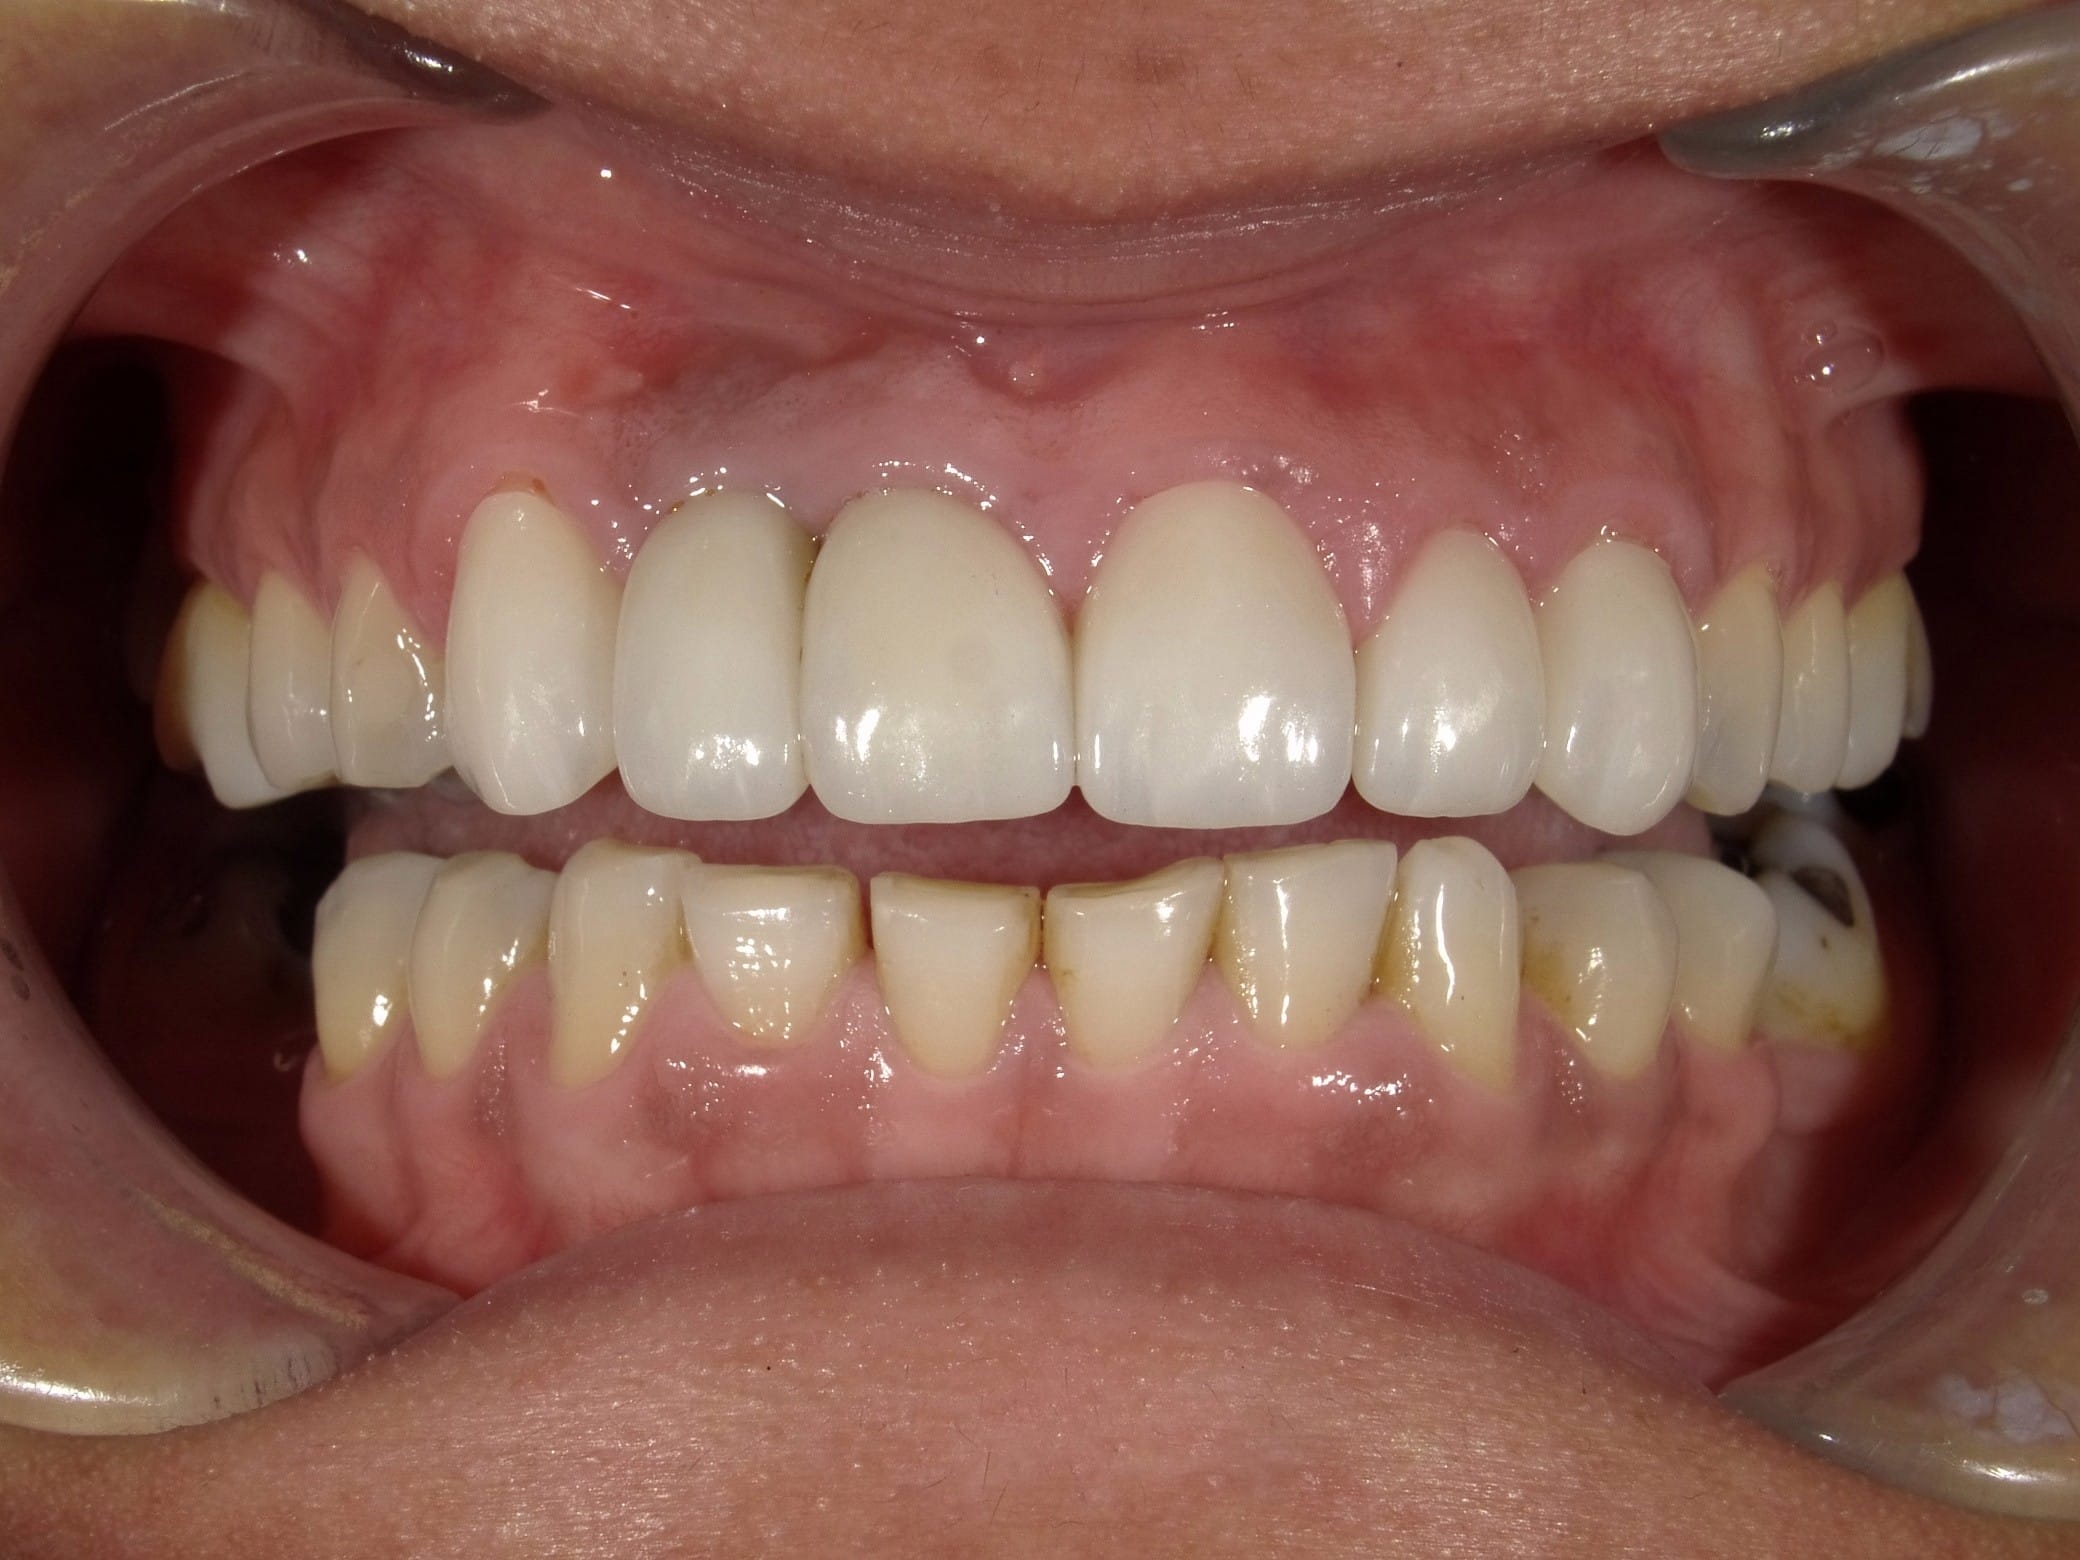 A little less gross after picture of teeth